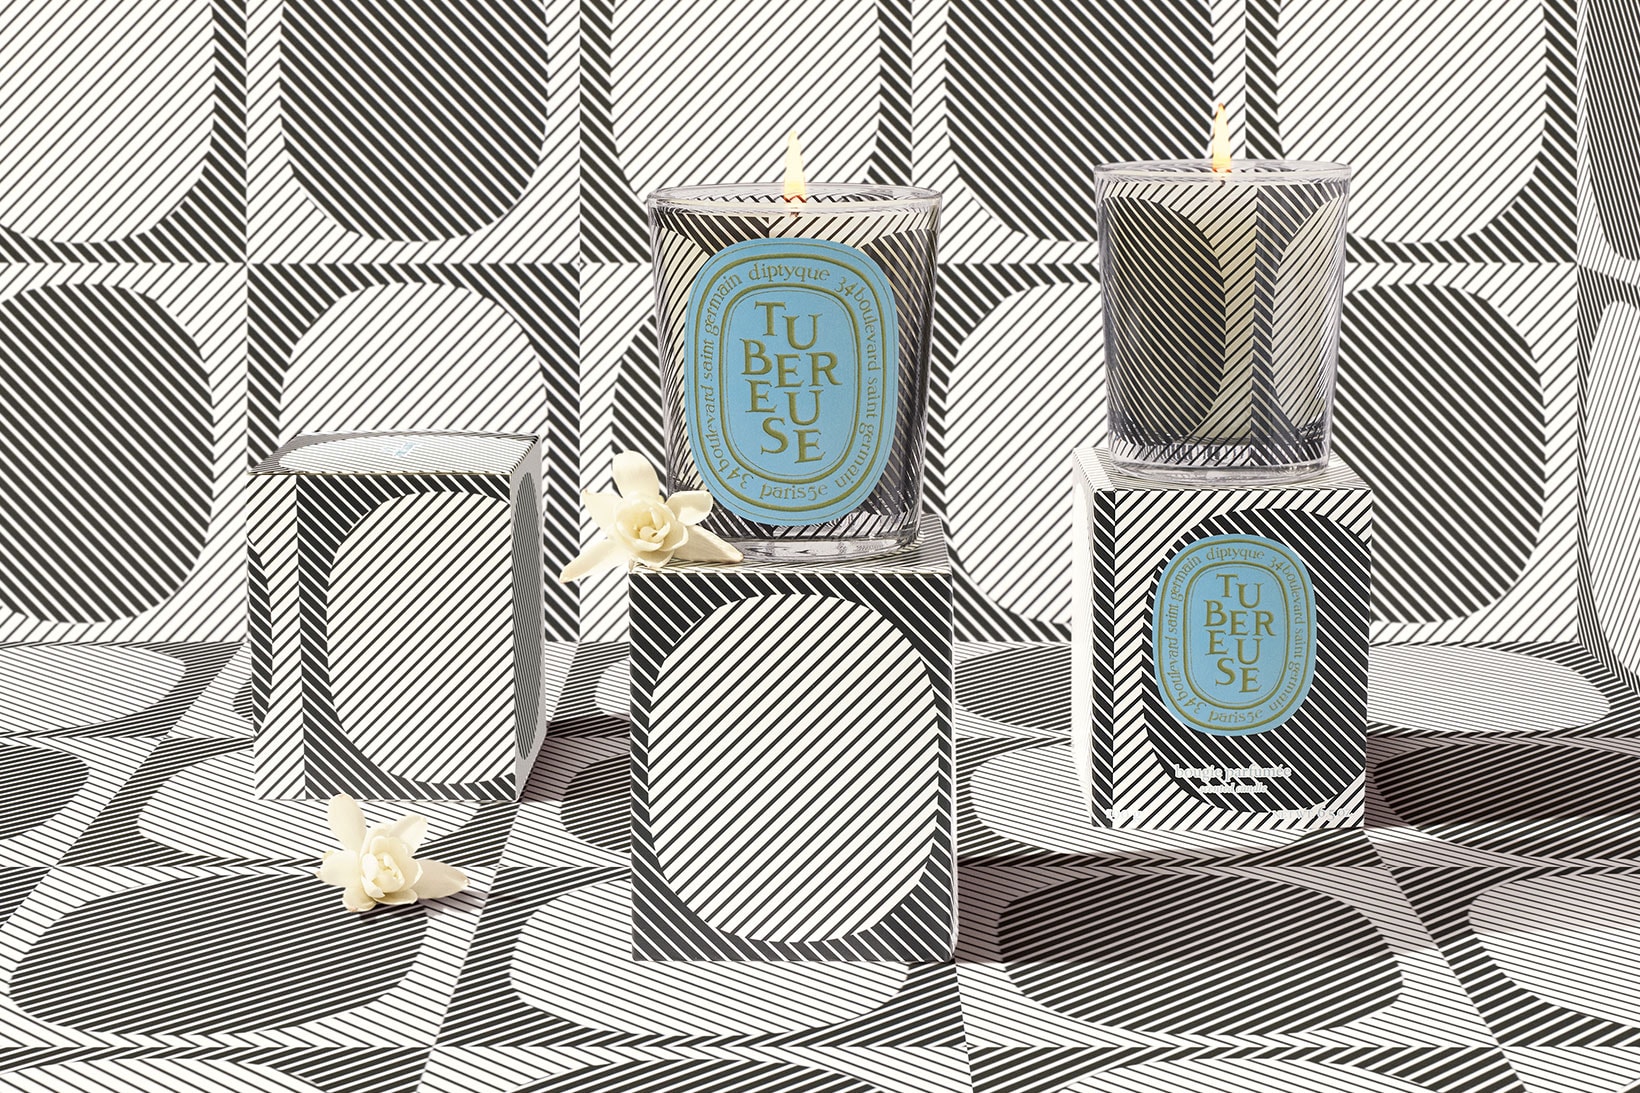 diptyque graphic collection scented candles 60th anniversary home fragrances baies figuier roses price release